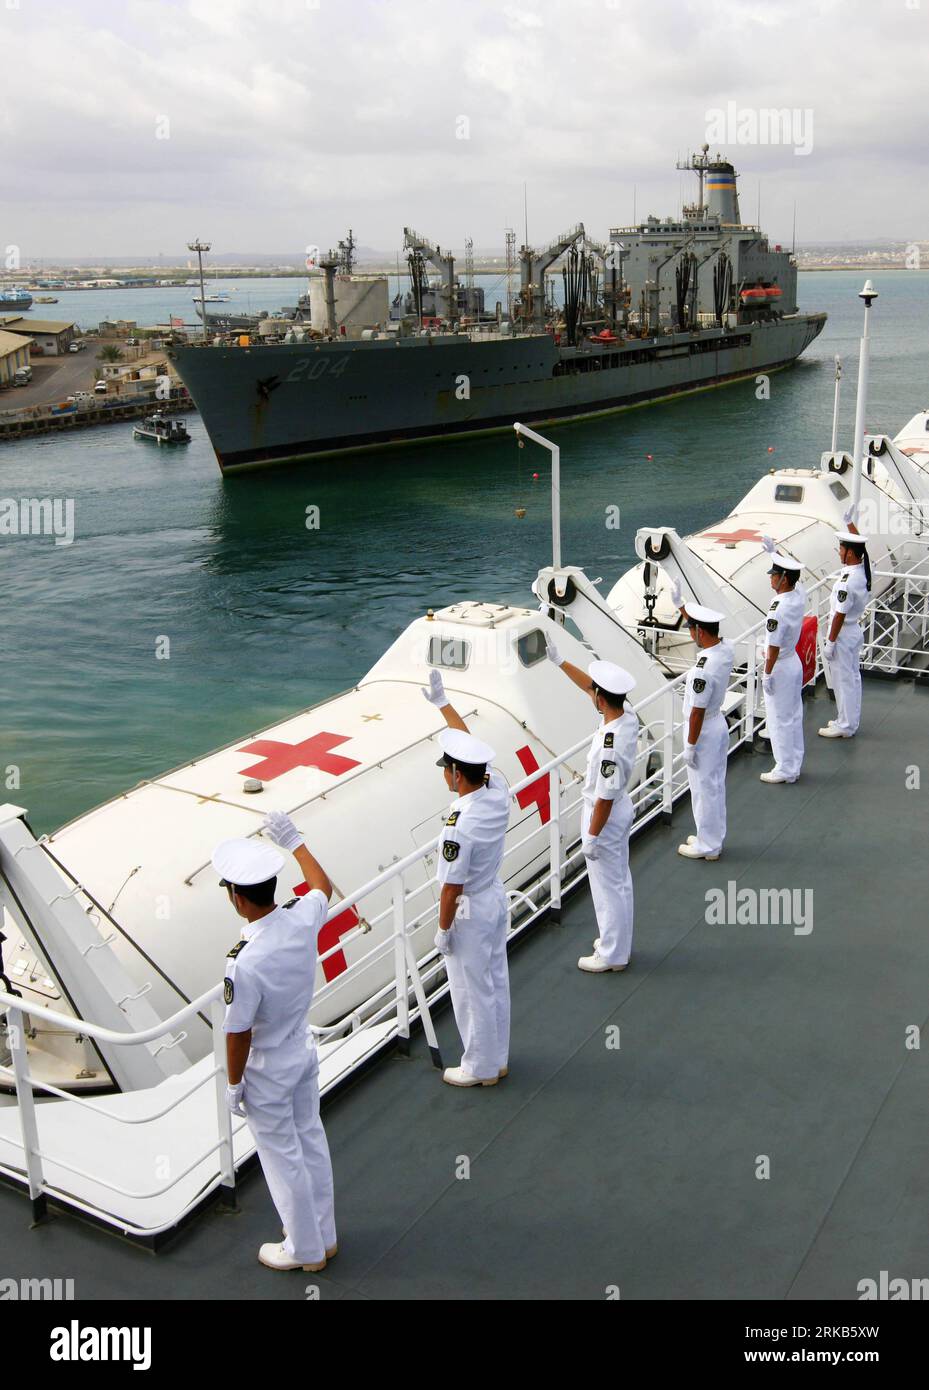 Bildnummer: 54485730  Datum: 29.09.2010  Copyright: imago/Xinhua (100929) -- DJIBOUTI, Sept. 29, 2010 (Xinhua) -- Crew members of China s hospital ship Peace Ark waves goodbye on the deck as the ship leaves the port of Djibouti, Sept. 29, 2010. The Peace Ark left for Kenya on Wednesday after providing medical services for local residents in Djibouti for a week. (Xinhua/Zha Chunming) (nxl) DJIBOUTI-CHINA-HOSPITAL SHIP-PEACE ARK-DEPARTURE PUBLICATIONxNOTxINxCHN Gesellschaft Friedensschiff Abschied Verabschiedung Schiff kbdig xsk 2010 hoch  Hospitalschiff Krankenhausschiff    Bildnummer 54485730 Stock Photo